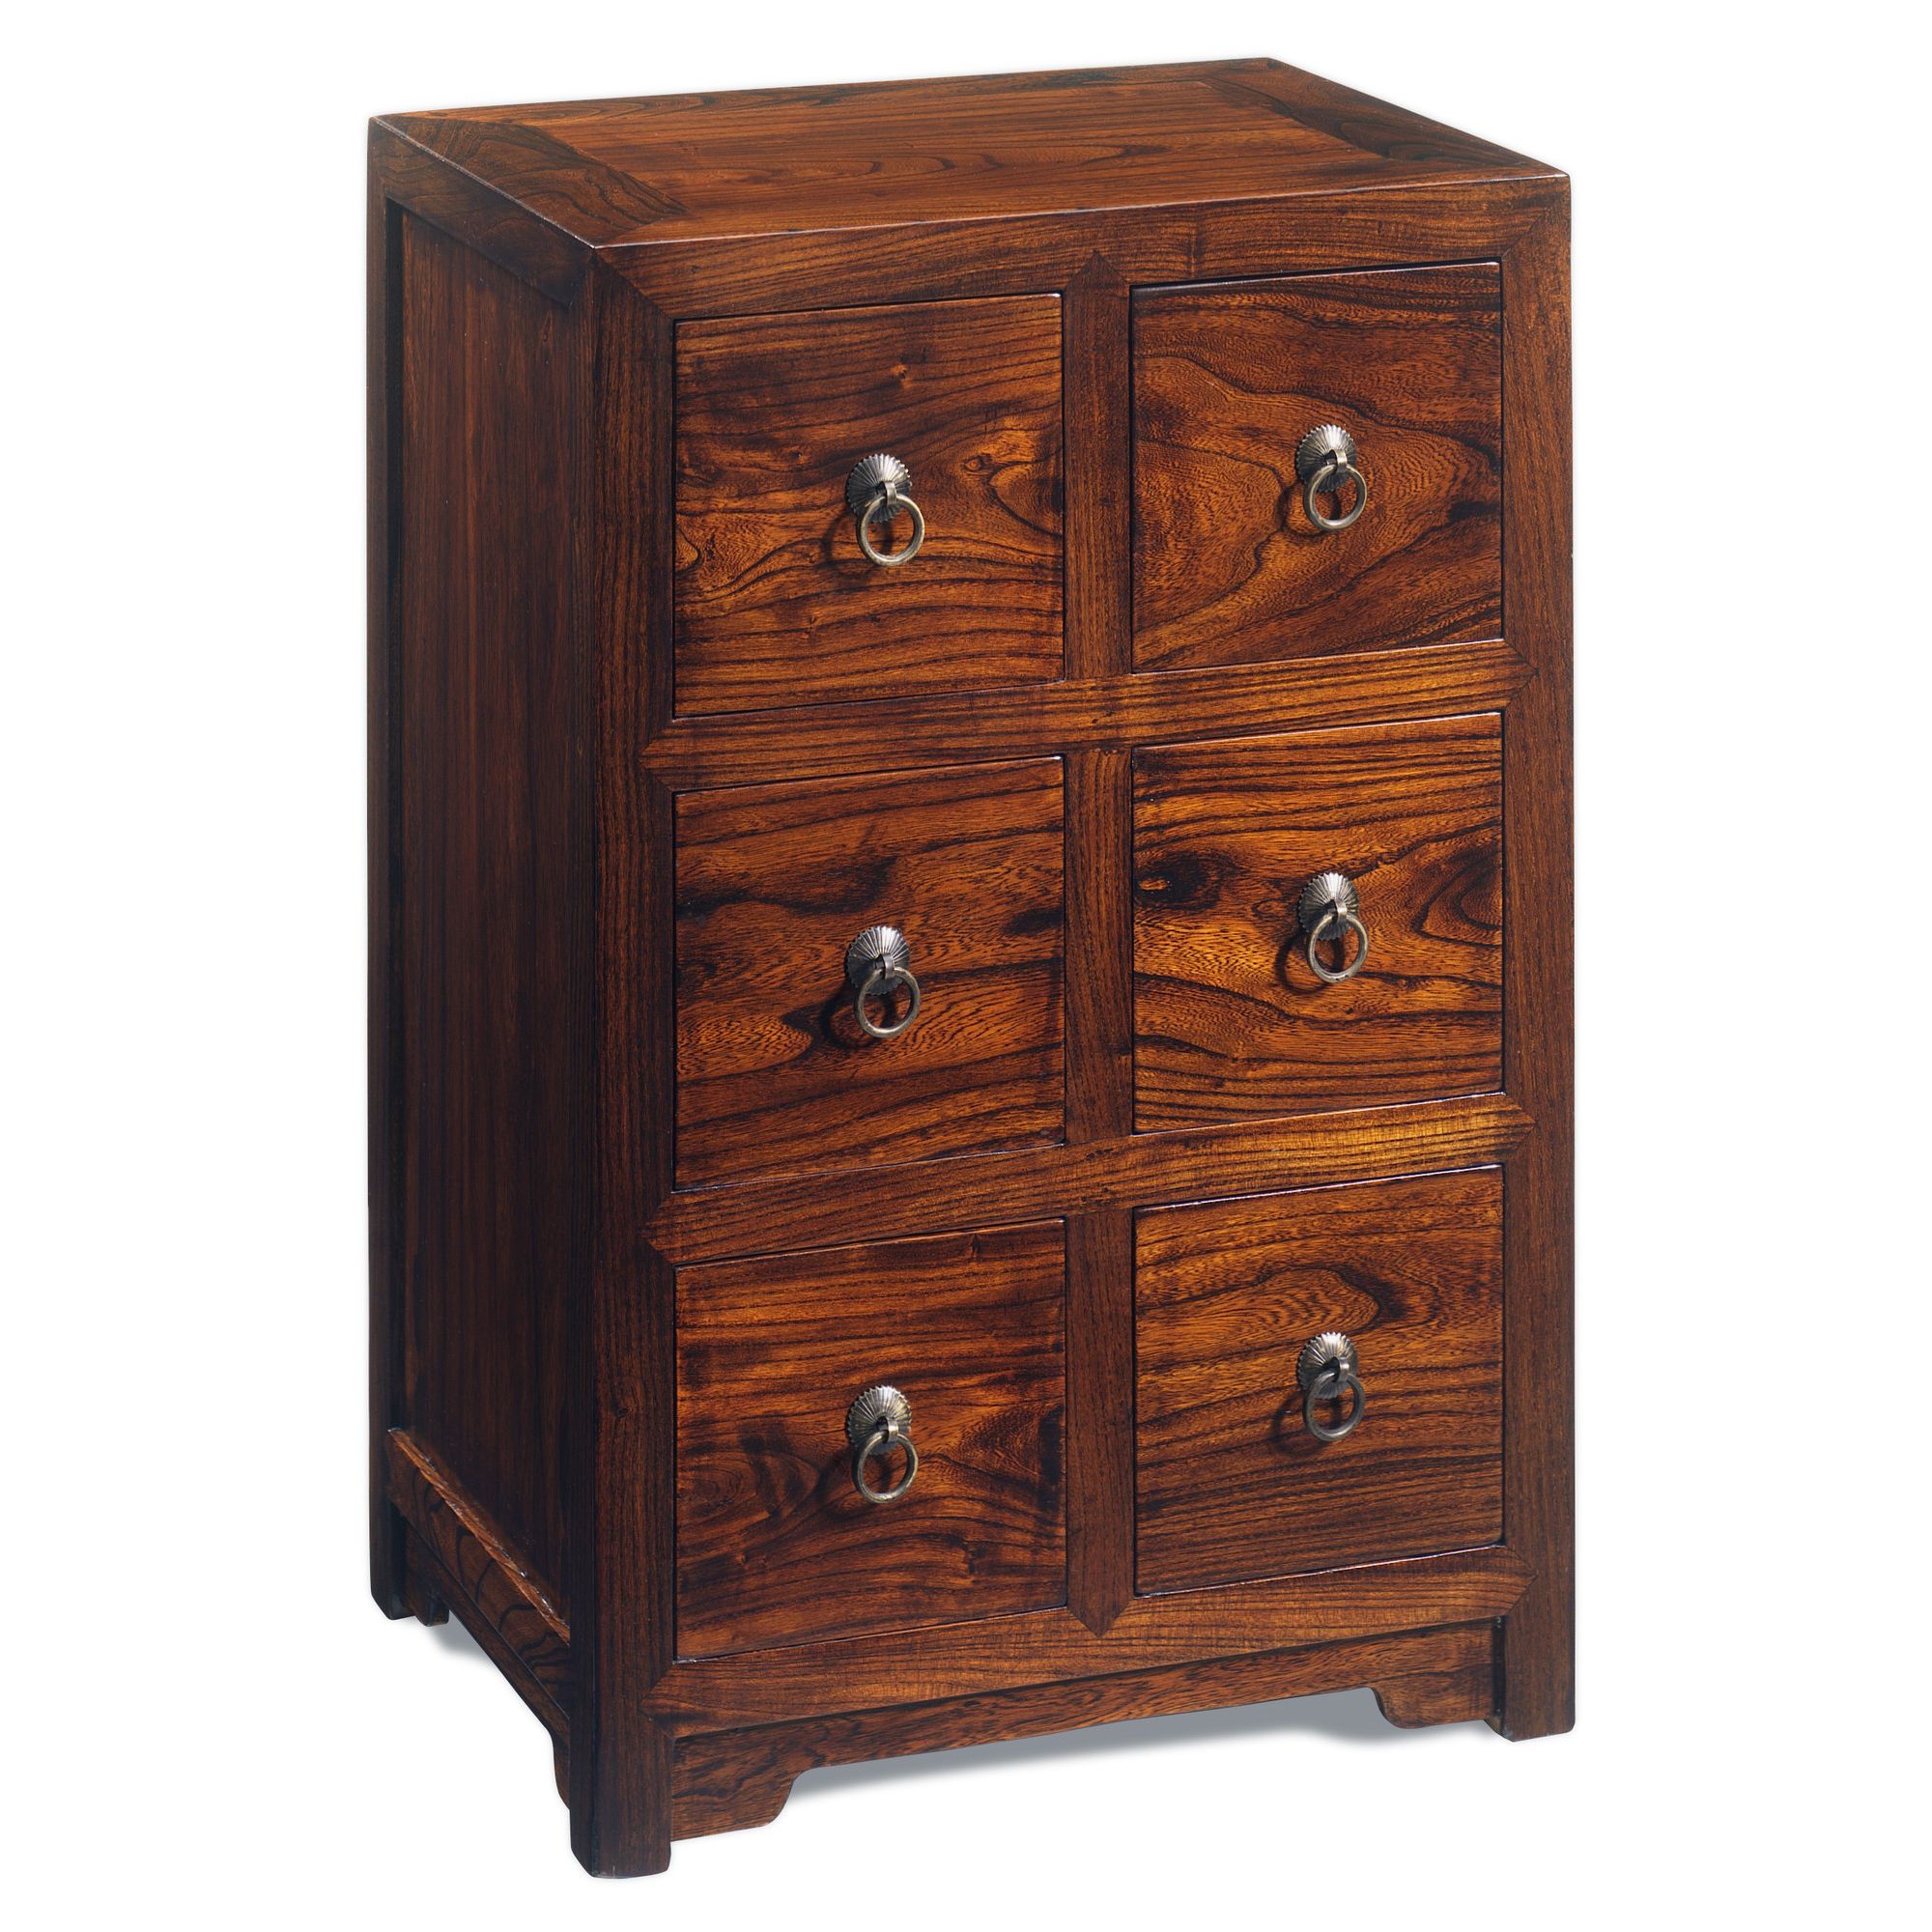 Shimu Chinese Classical Small Herbalist Chest - Warm Elm at Tesco Direct